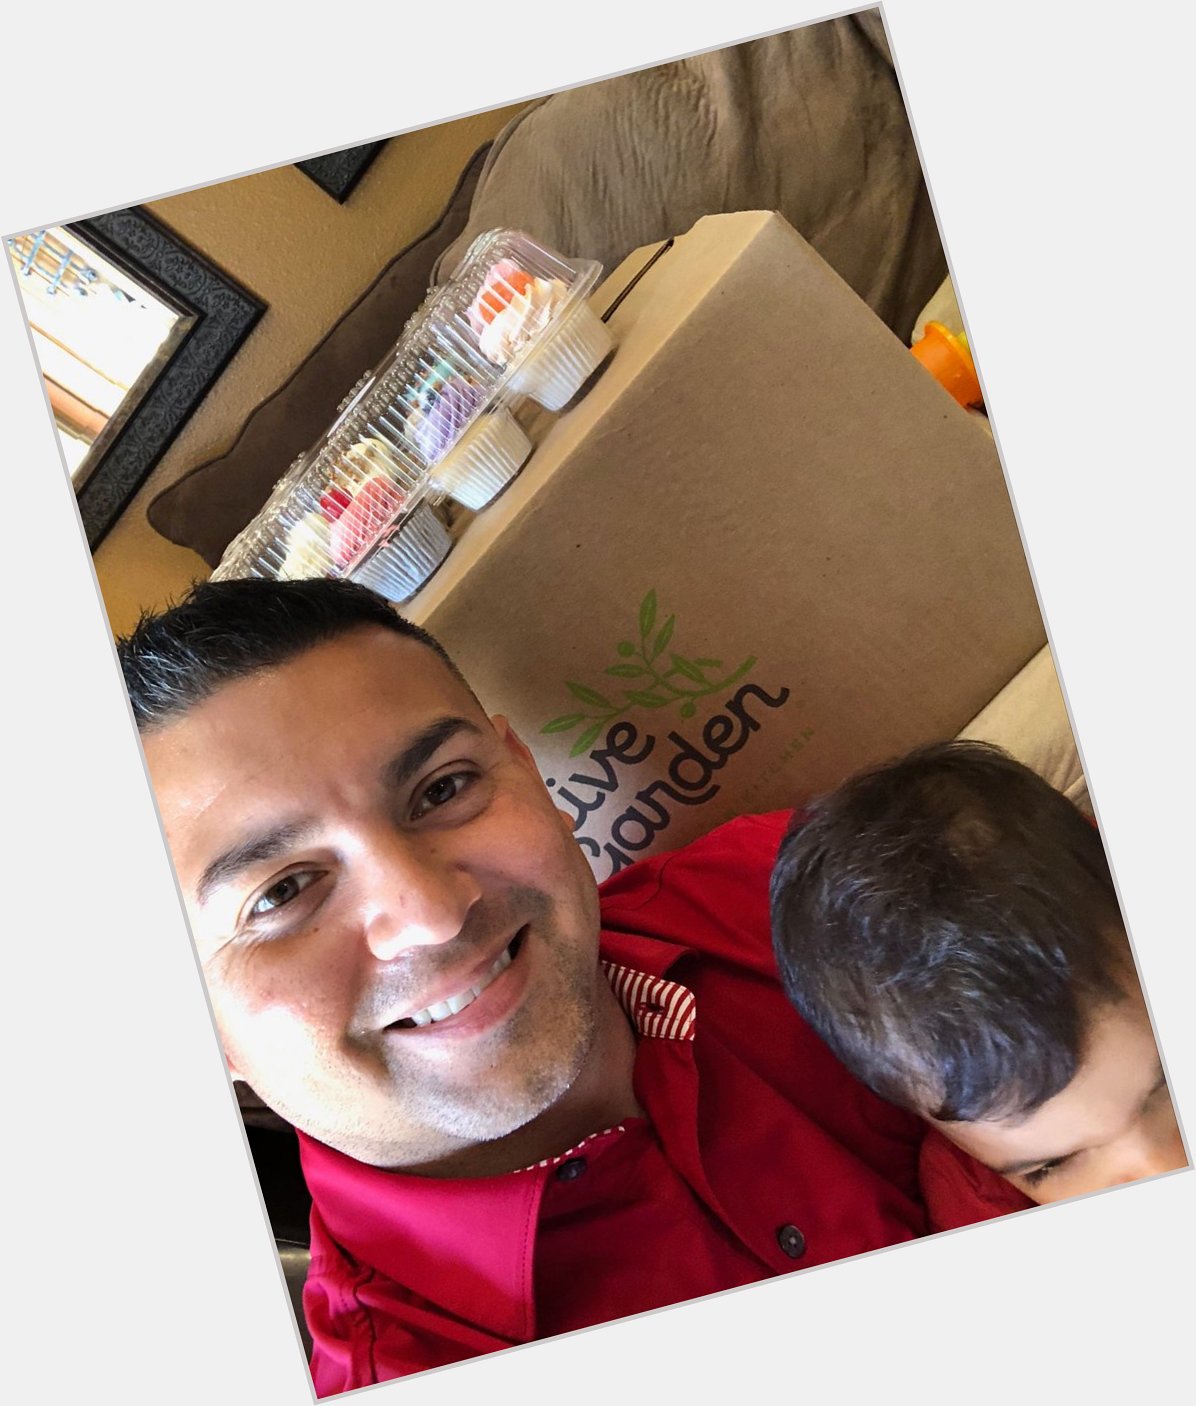 Happy 1st Birthday at WHS to Mr. Andy Garcia. We hope you enjoyed your special delivery with your family ! 